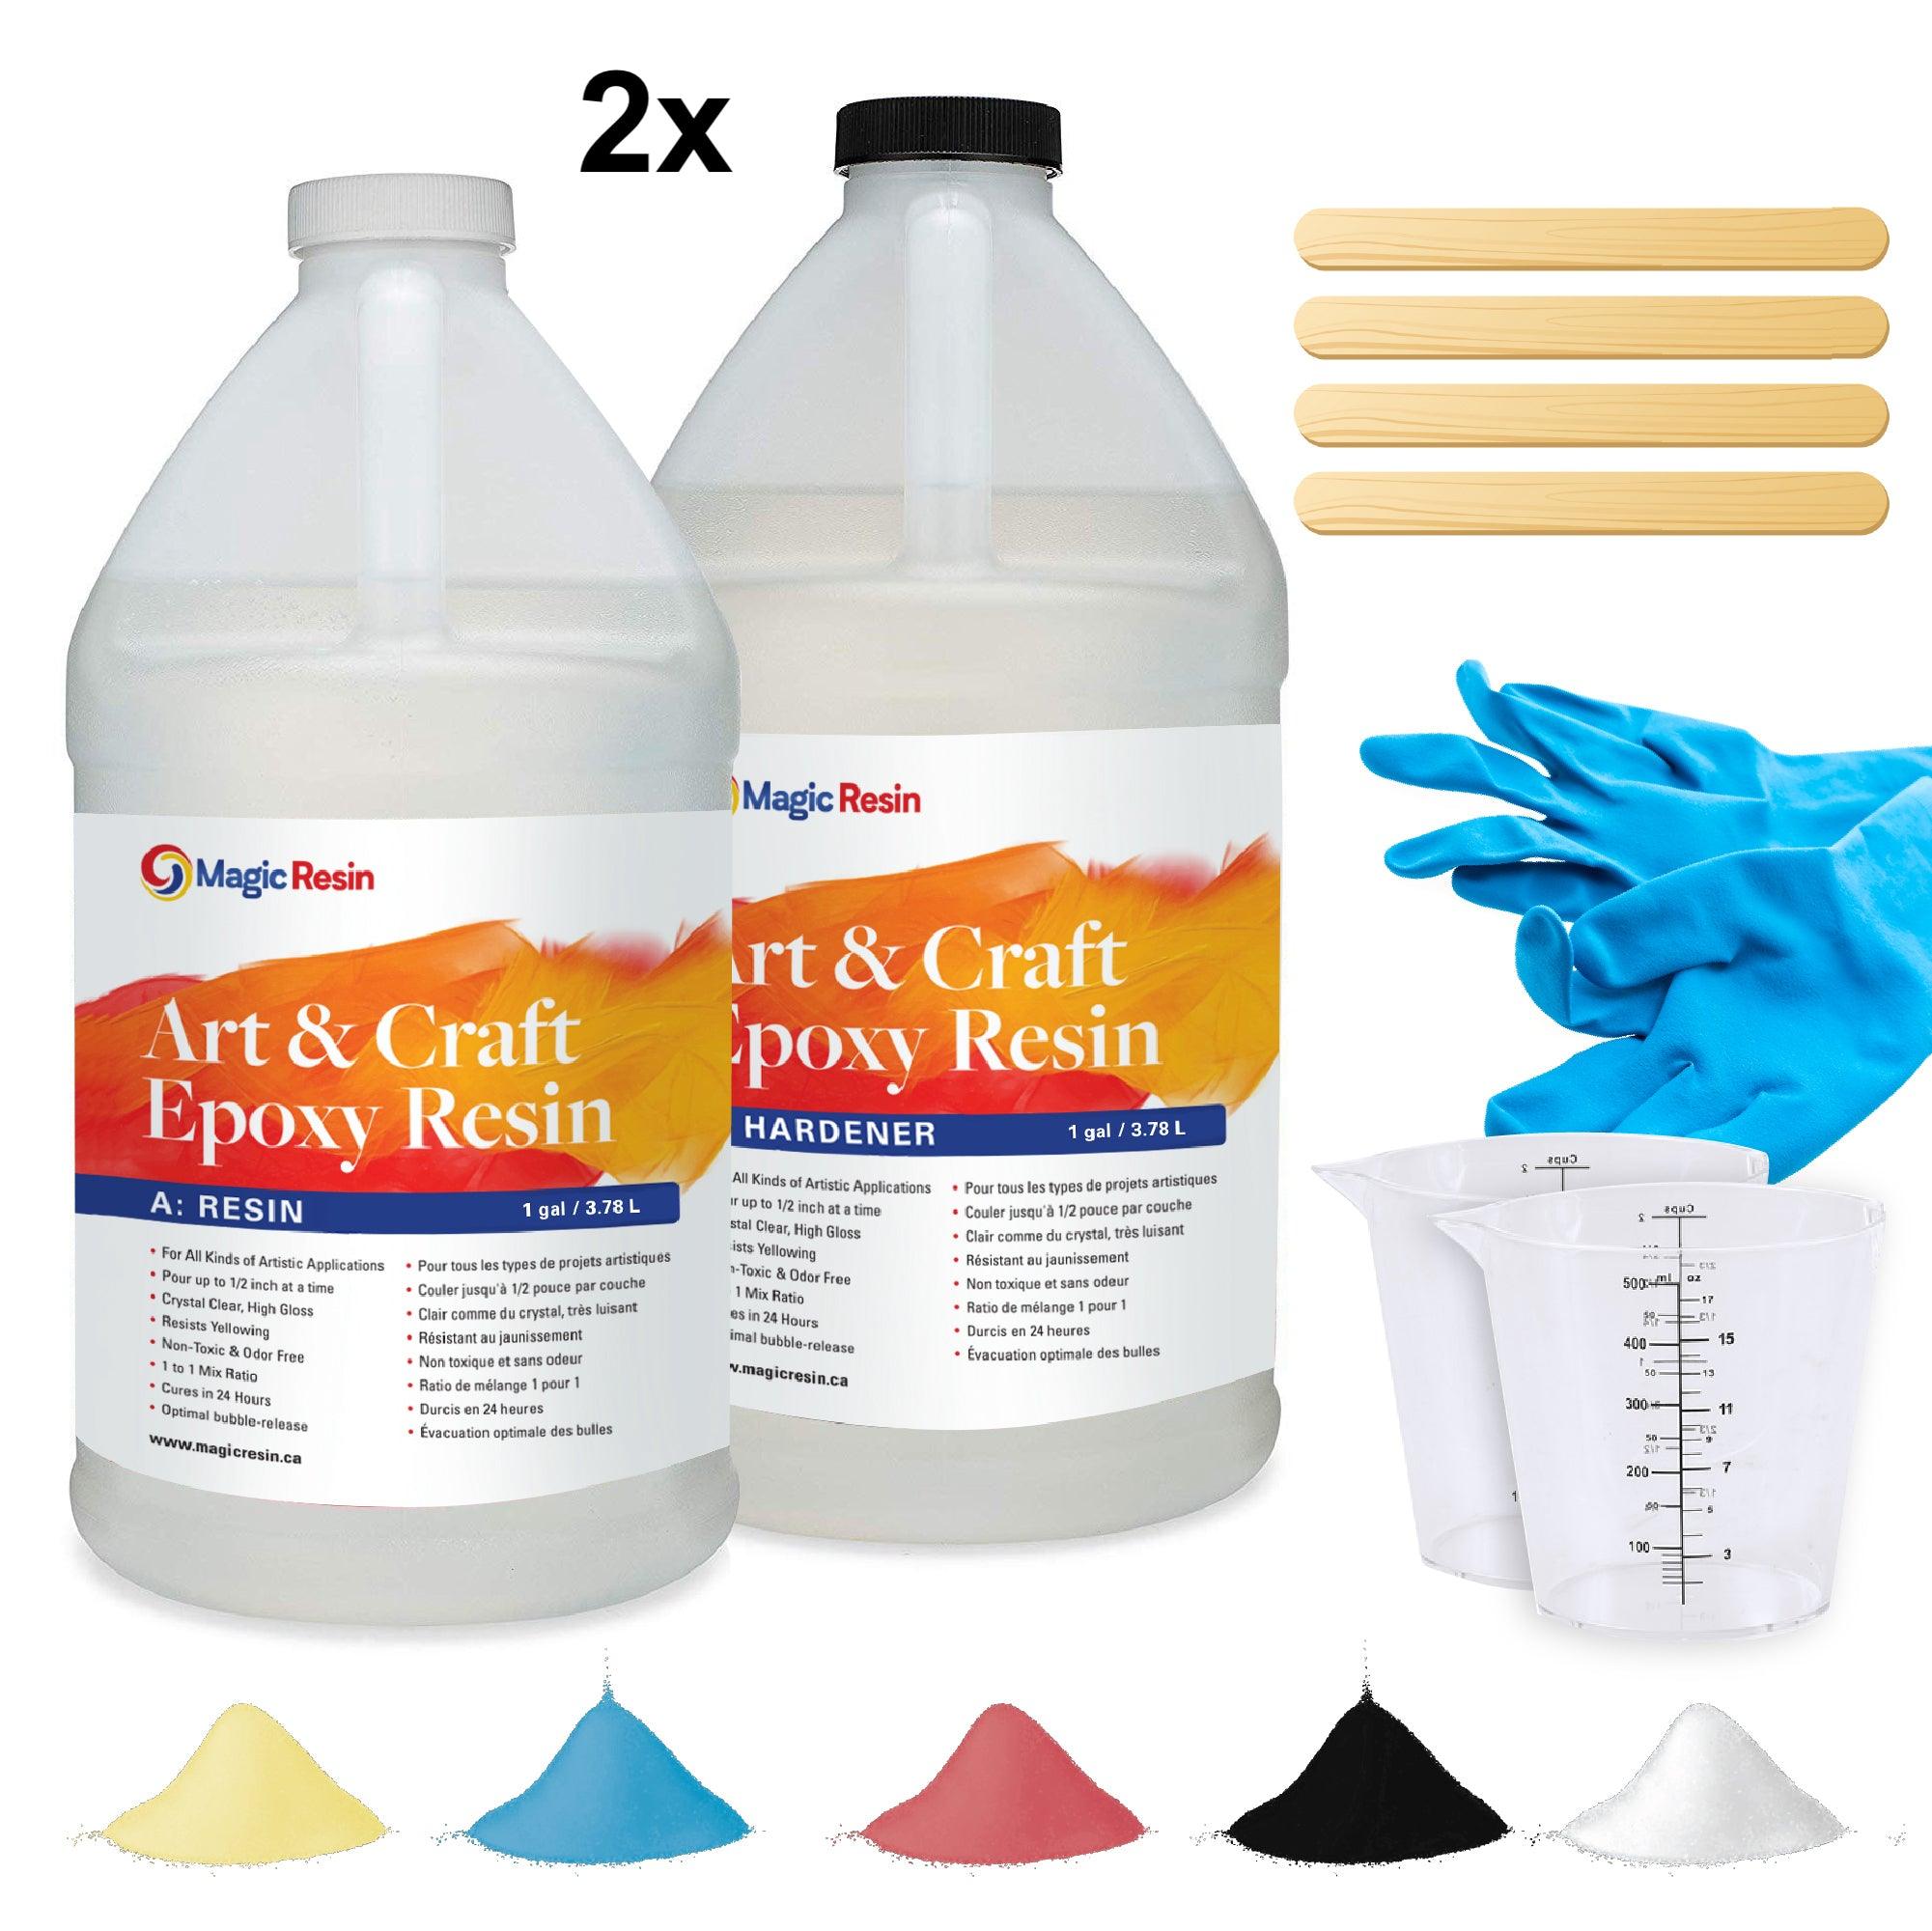 Epoxy Resin, Upgrade Formula 80OZ 2X UV Resistant Resin, Epoxy Casting and  Coating Resin Kit with Sticks, Self Leveling Easy Mix for Art, Crafts,  Jewelry Making, River Tables of Art Resin 